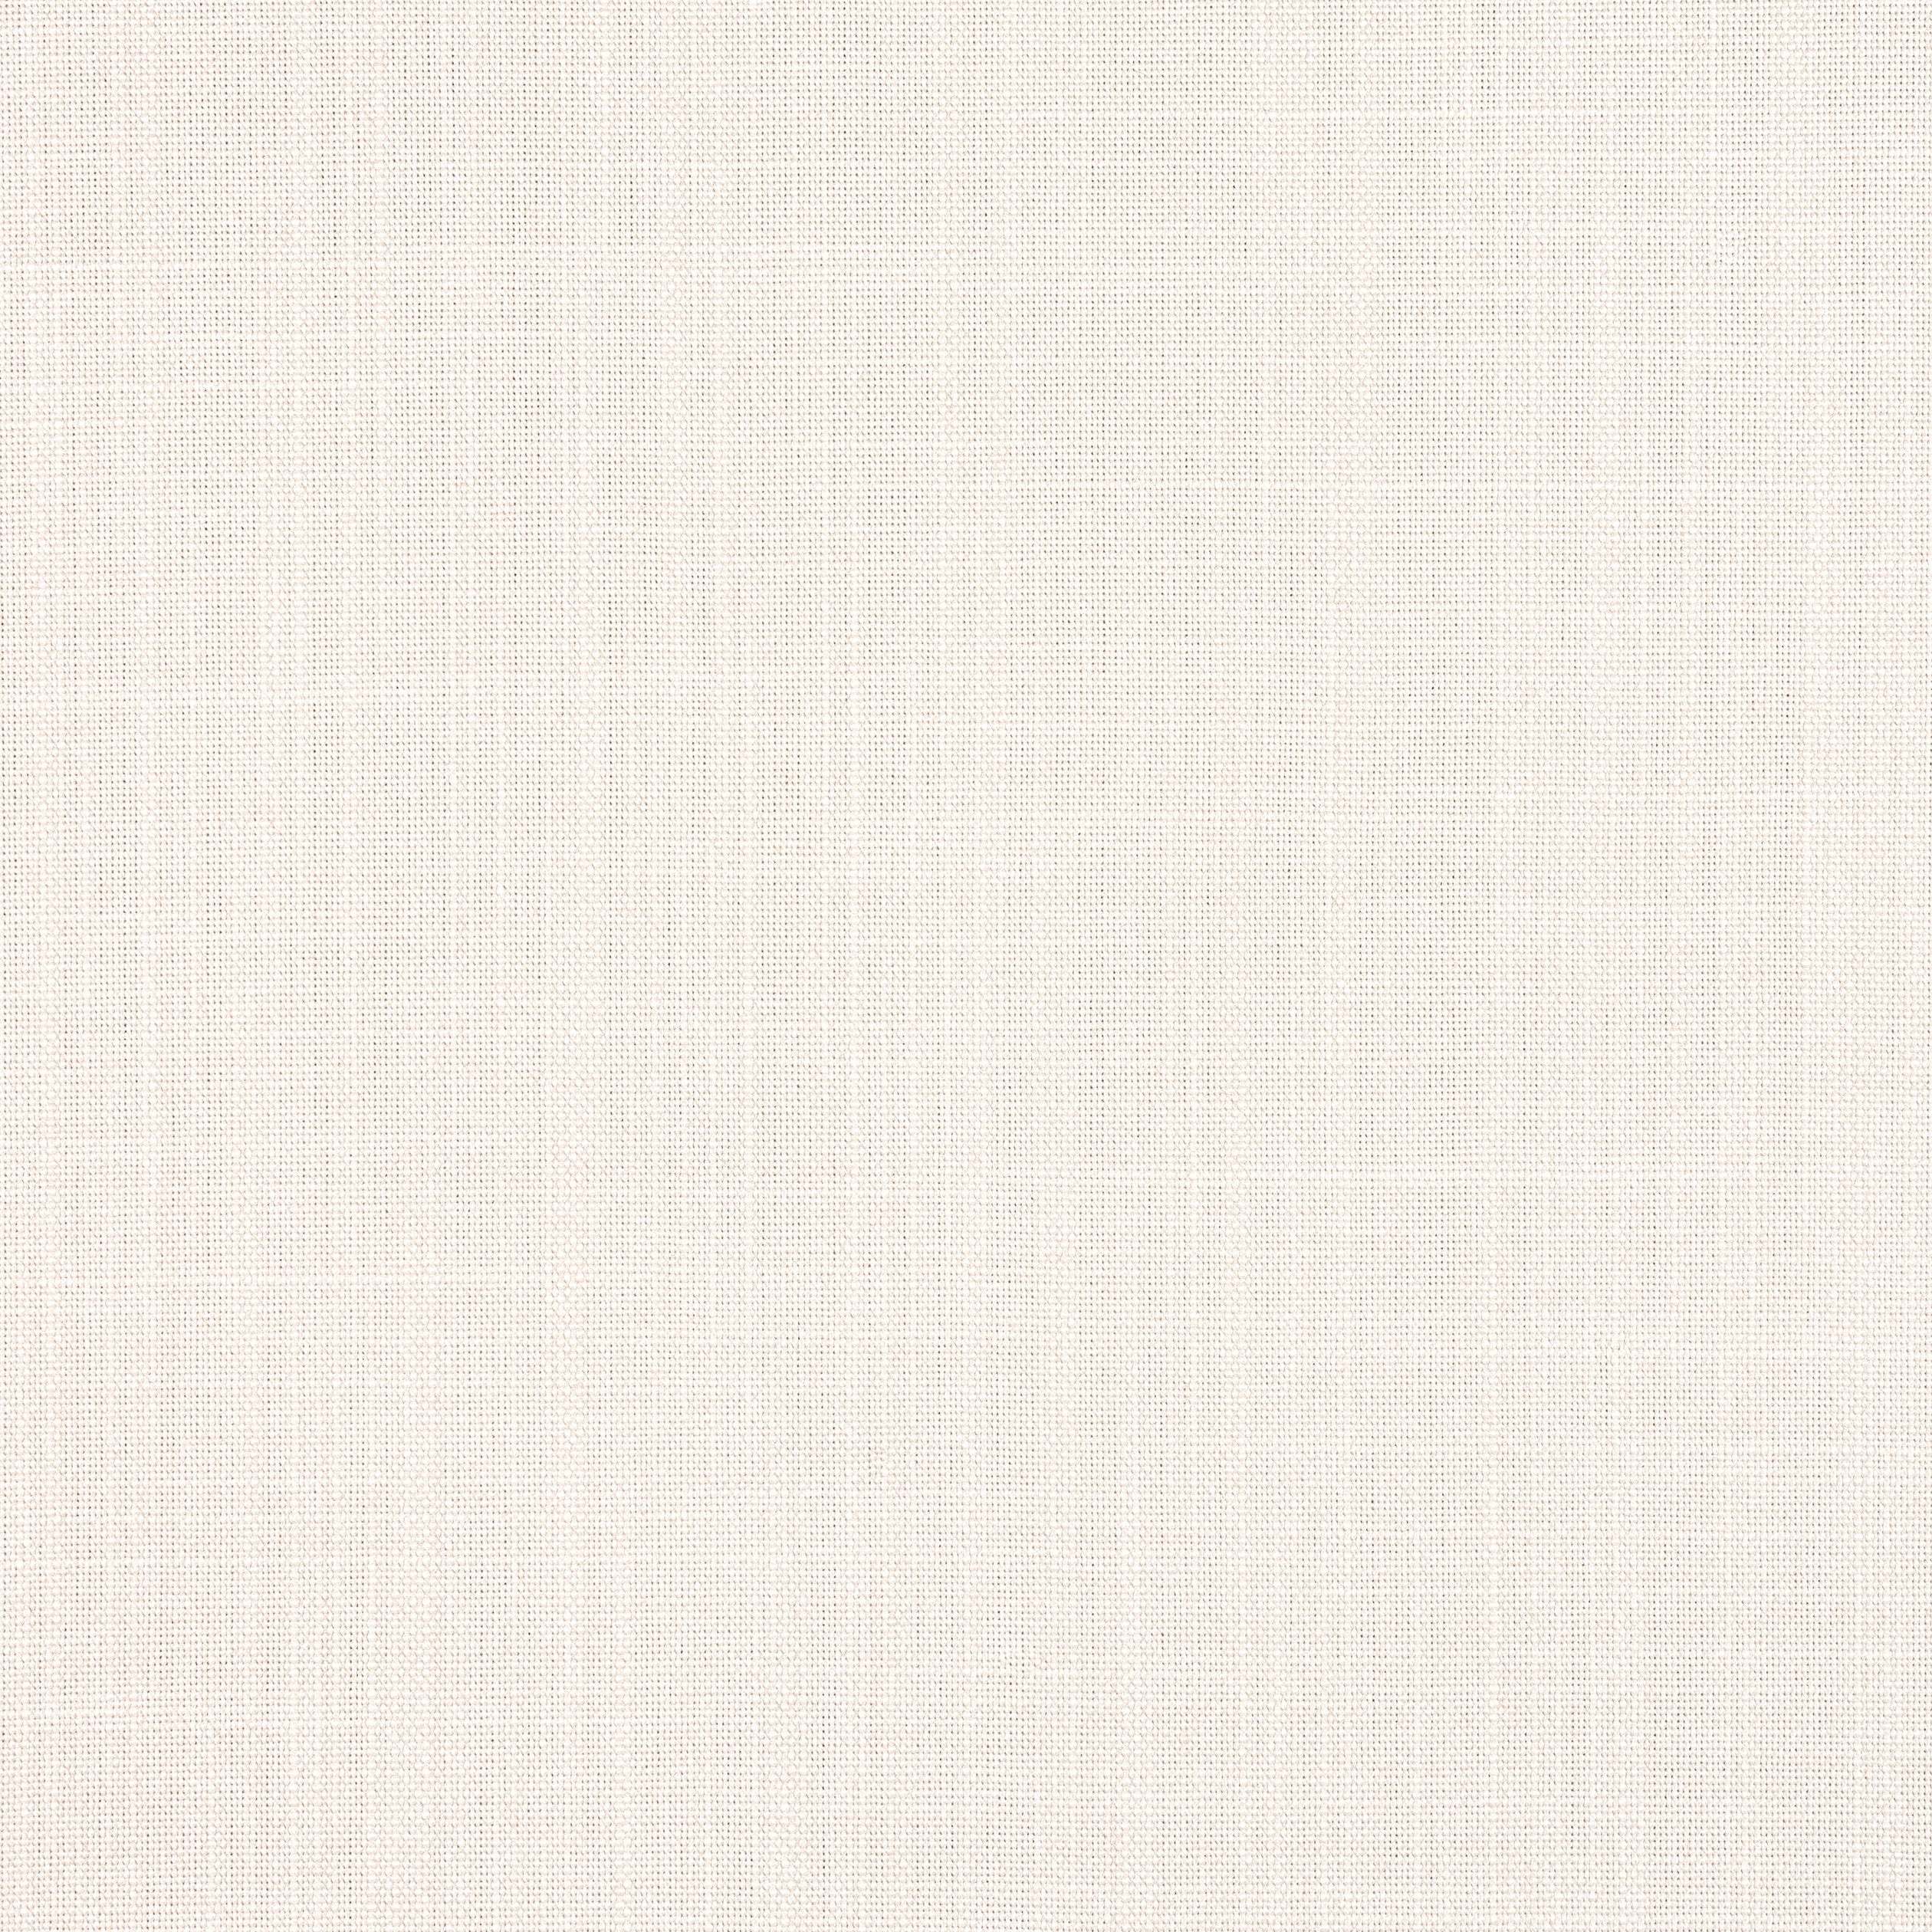 Tela fabric in sand color - pattern number W8575 - by Thibaut in the Villa Textures collection